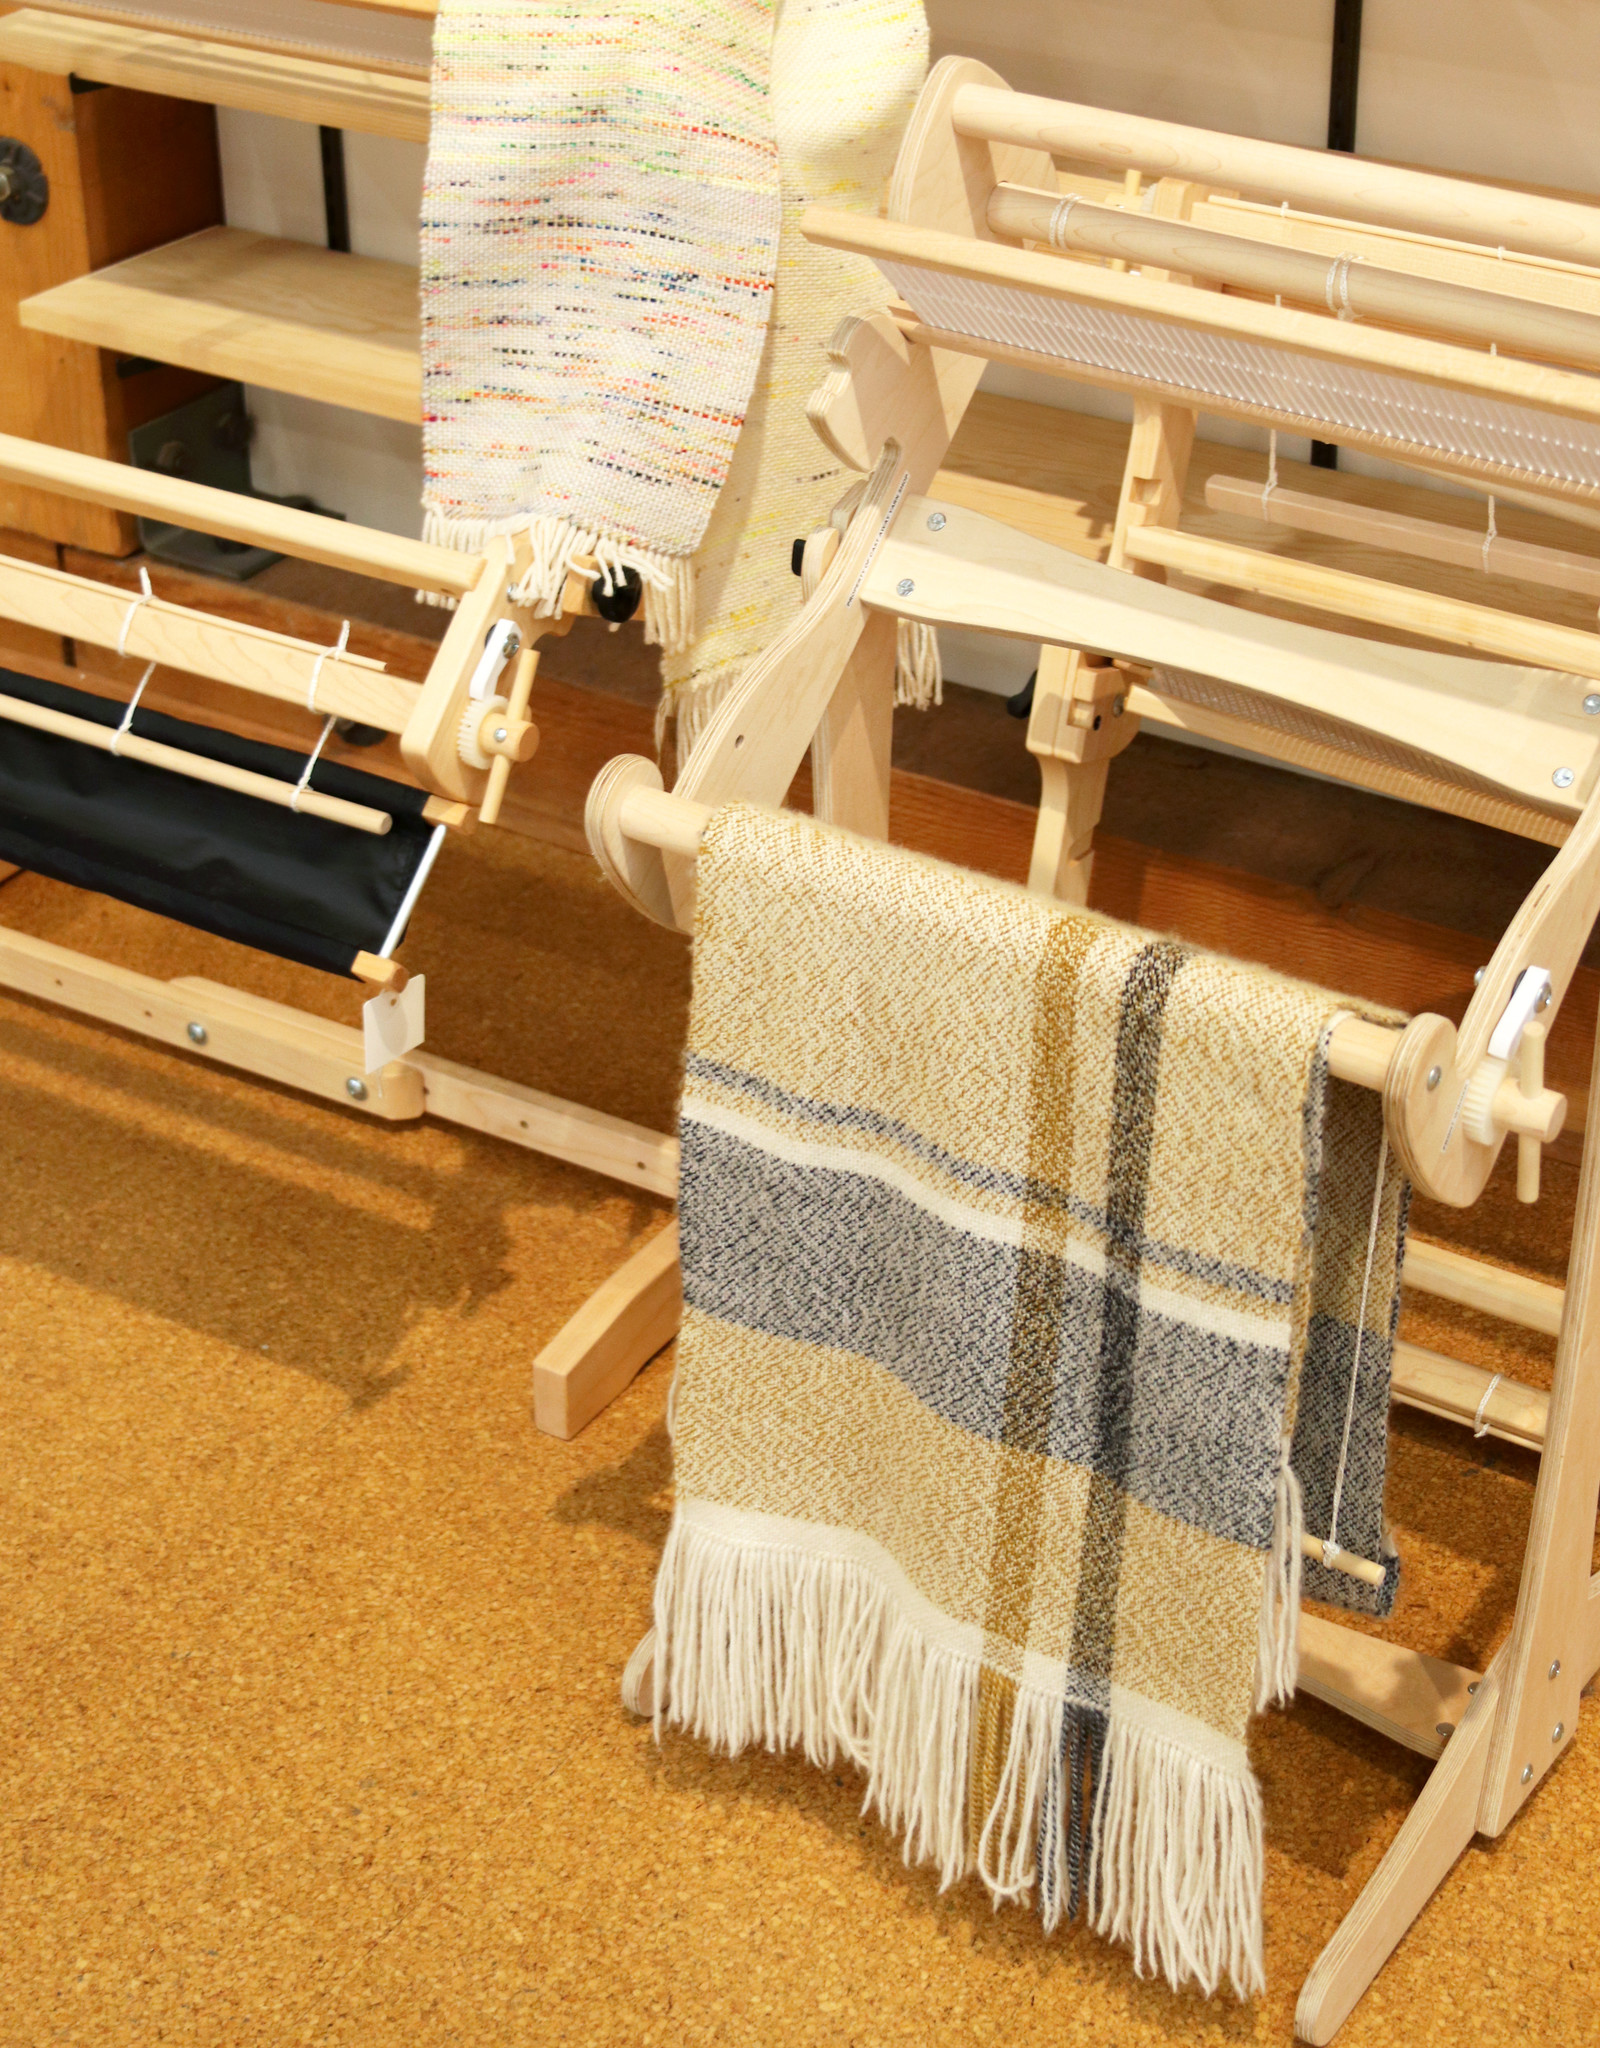 Learn to Weave on a Rigid Heddle Loom